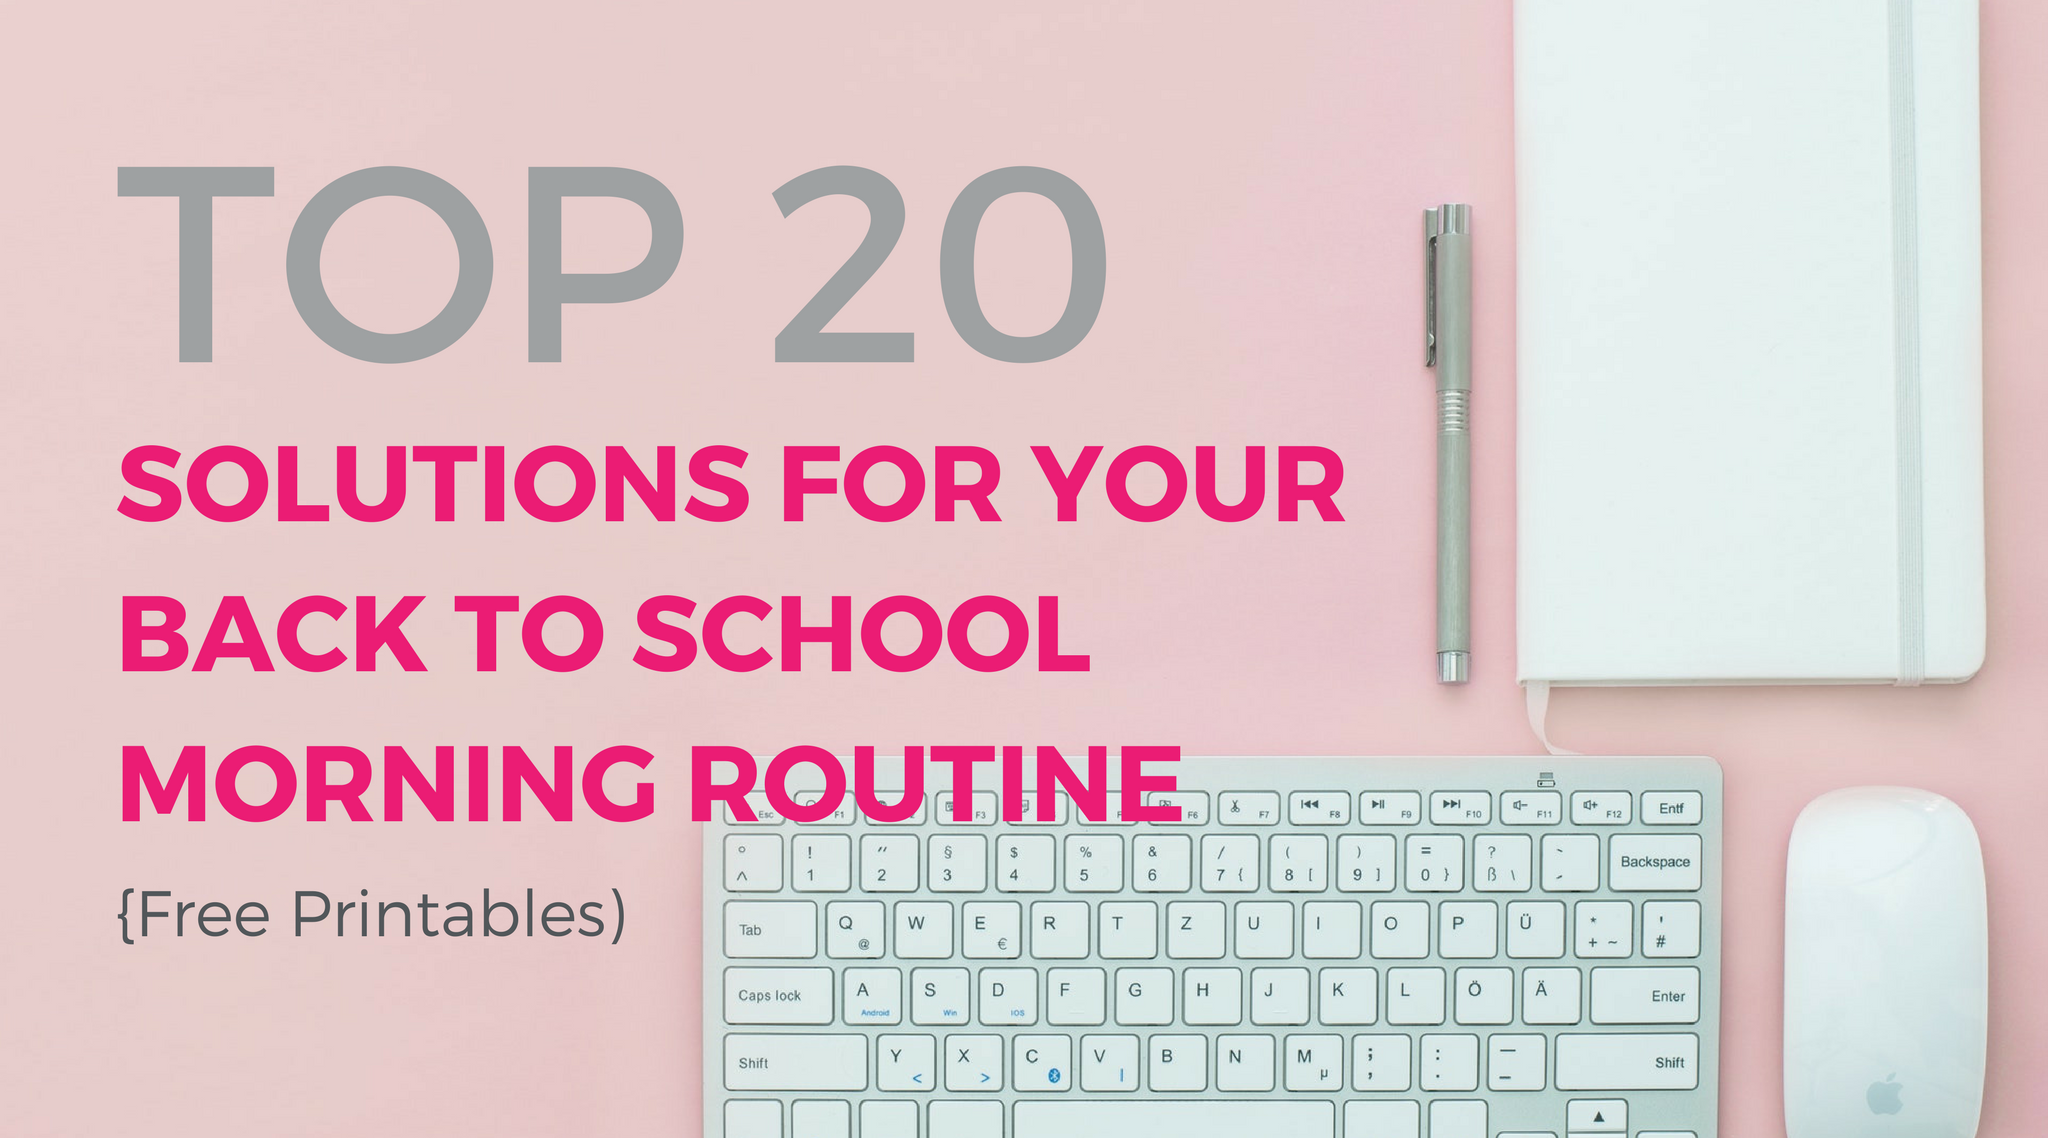 Shefit's Top 20 Solutions for back to school morning routine with free printables